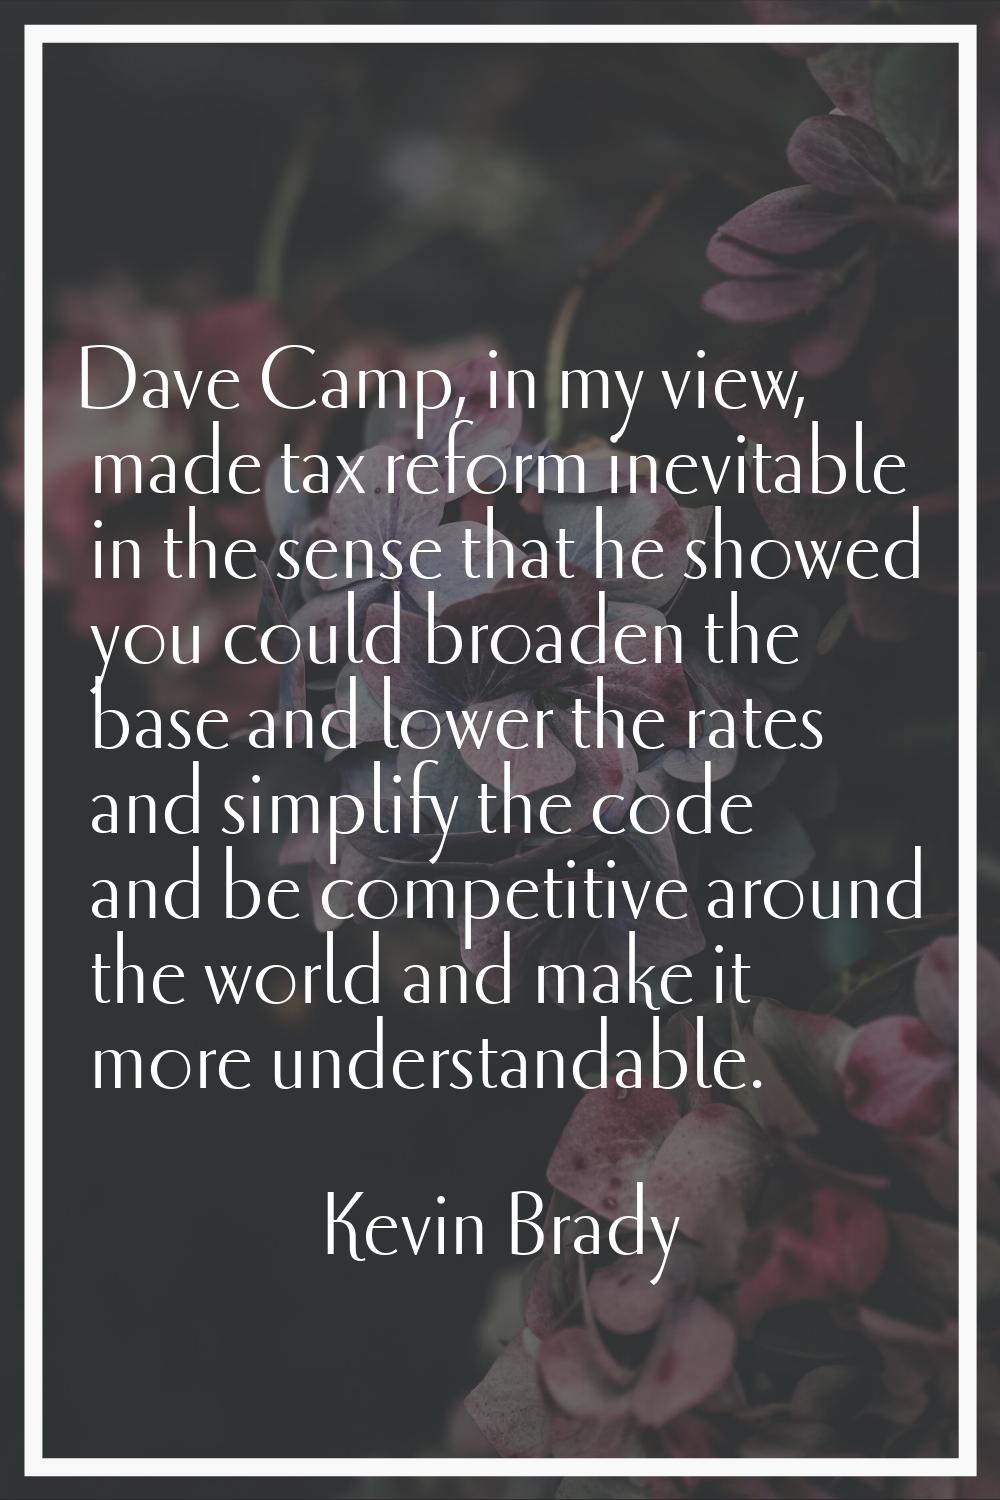 Dave Camp, in my view, made tax reform inevitable in the sense that he showed you could broaden the